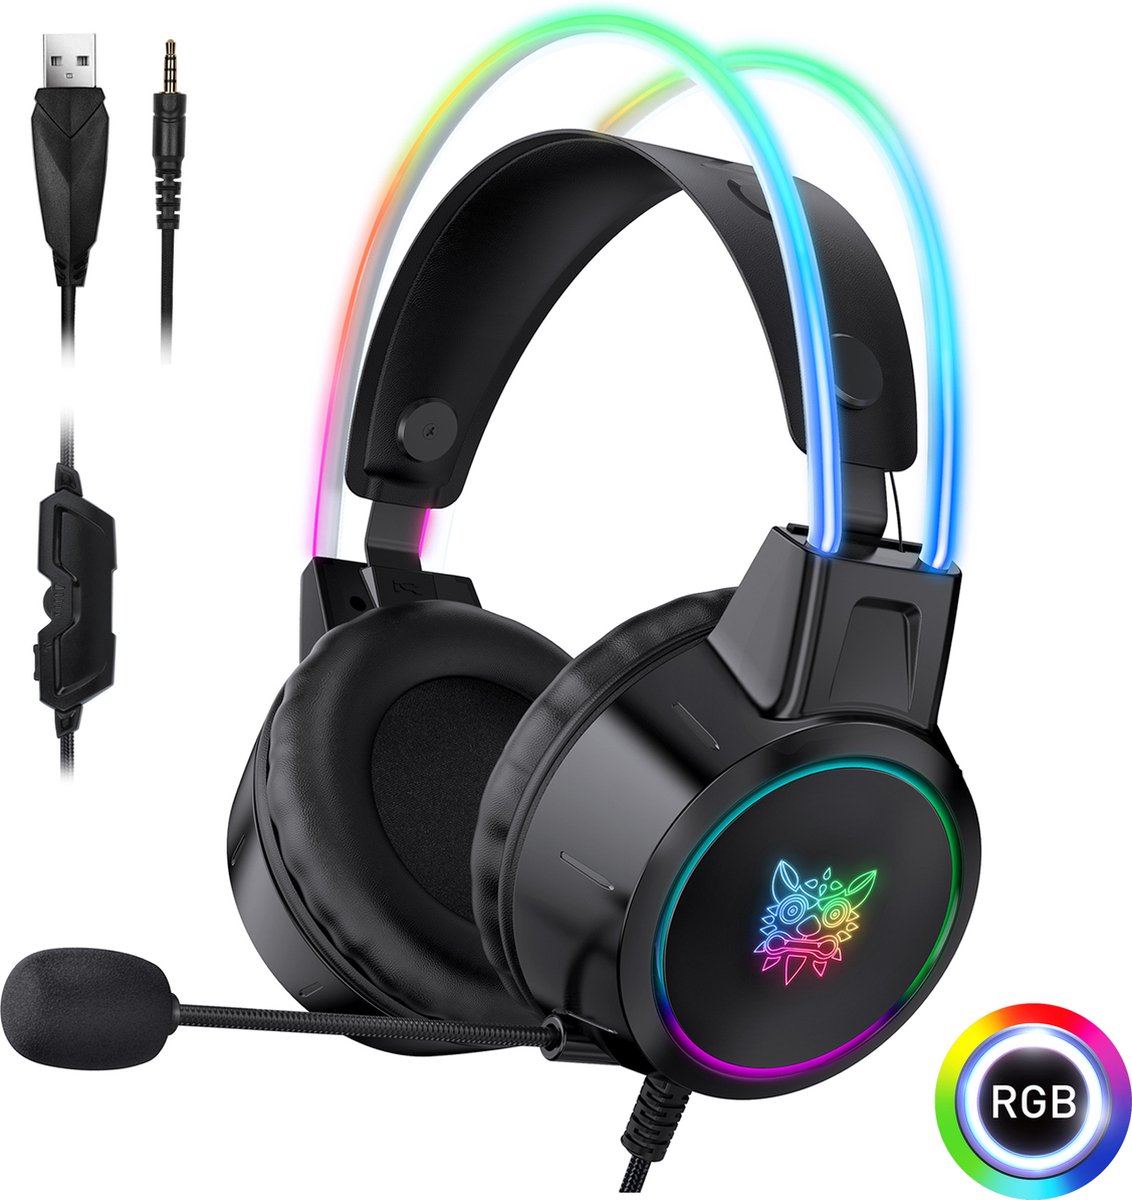 Galesto RGB X15 PRO Koptelefoon - RGB led verlichting - Voor PS4 PS5 en XBOX One Gaming Hoofdtelefoon - Professionele Gaming Headset - Surround Sound & Noise cancelling headset